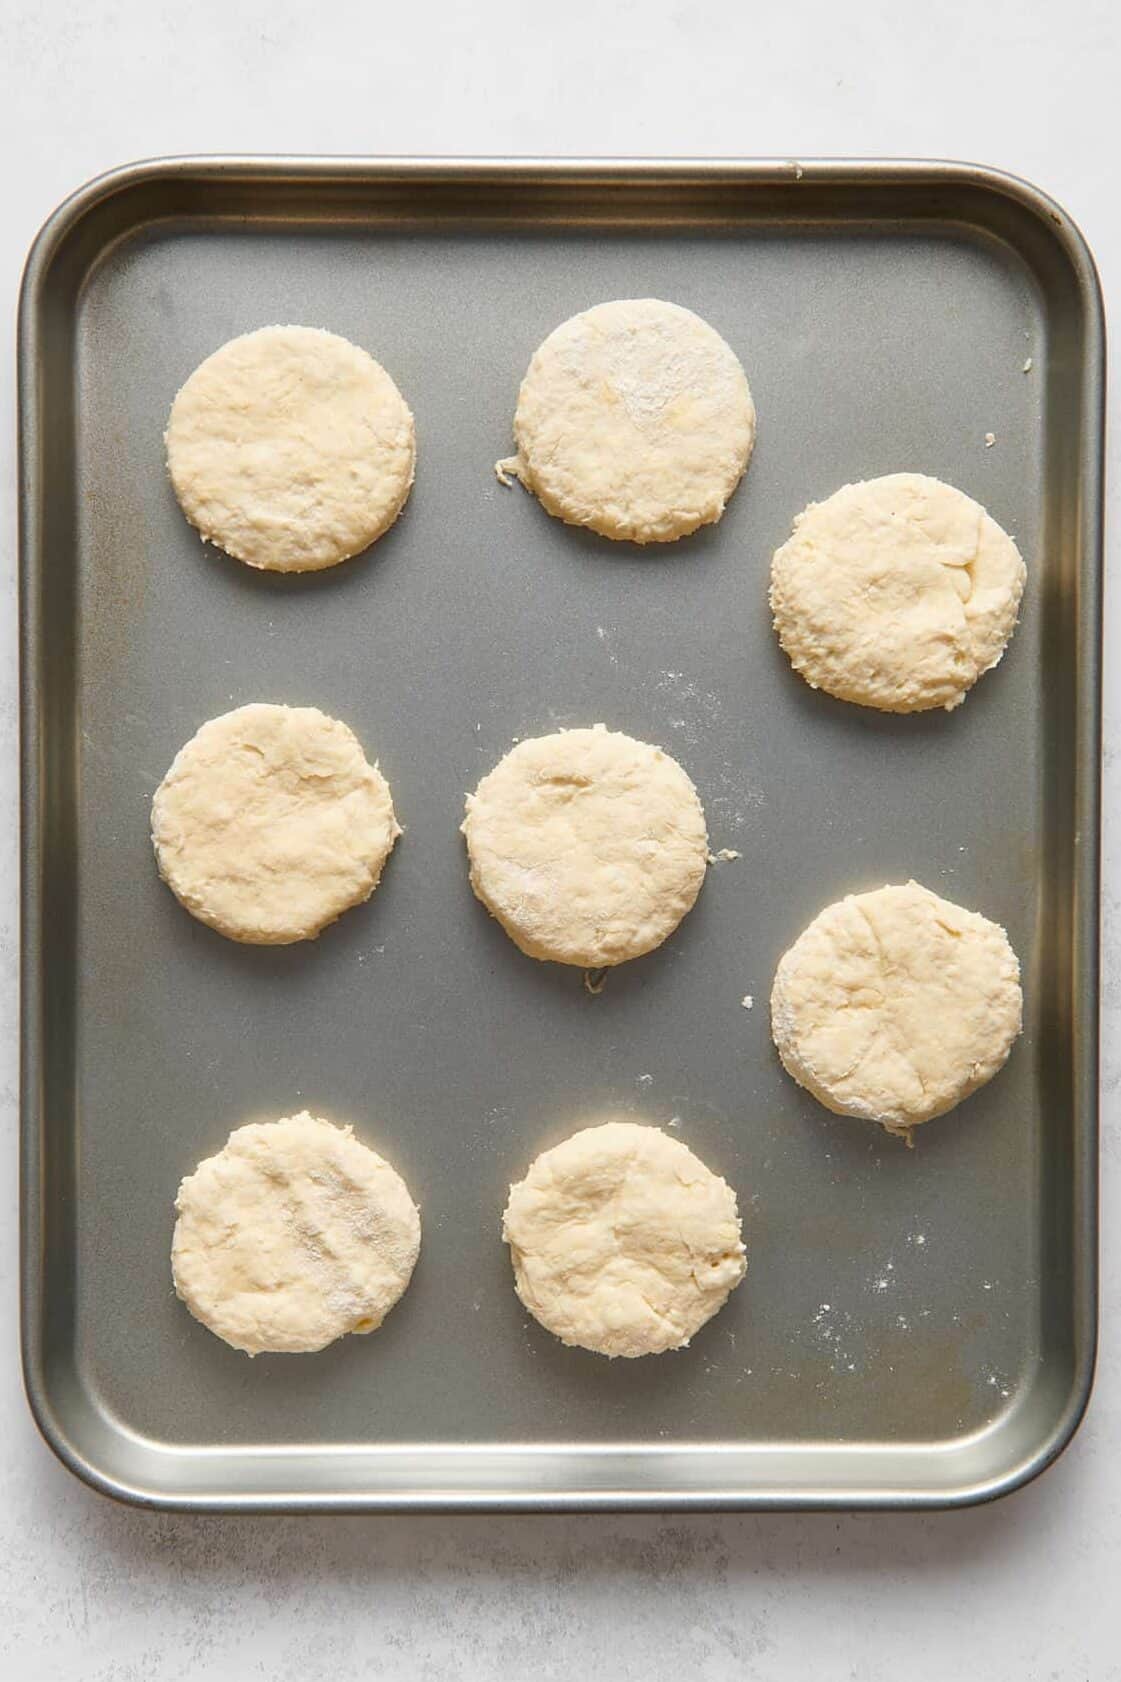 8 biscuits cut and arranged on a baking tray